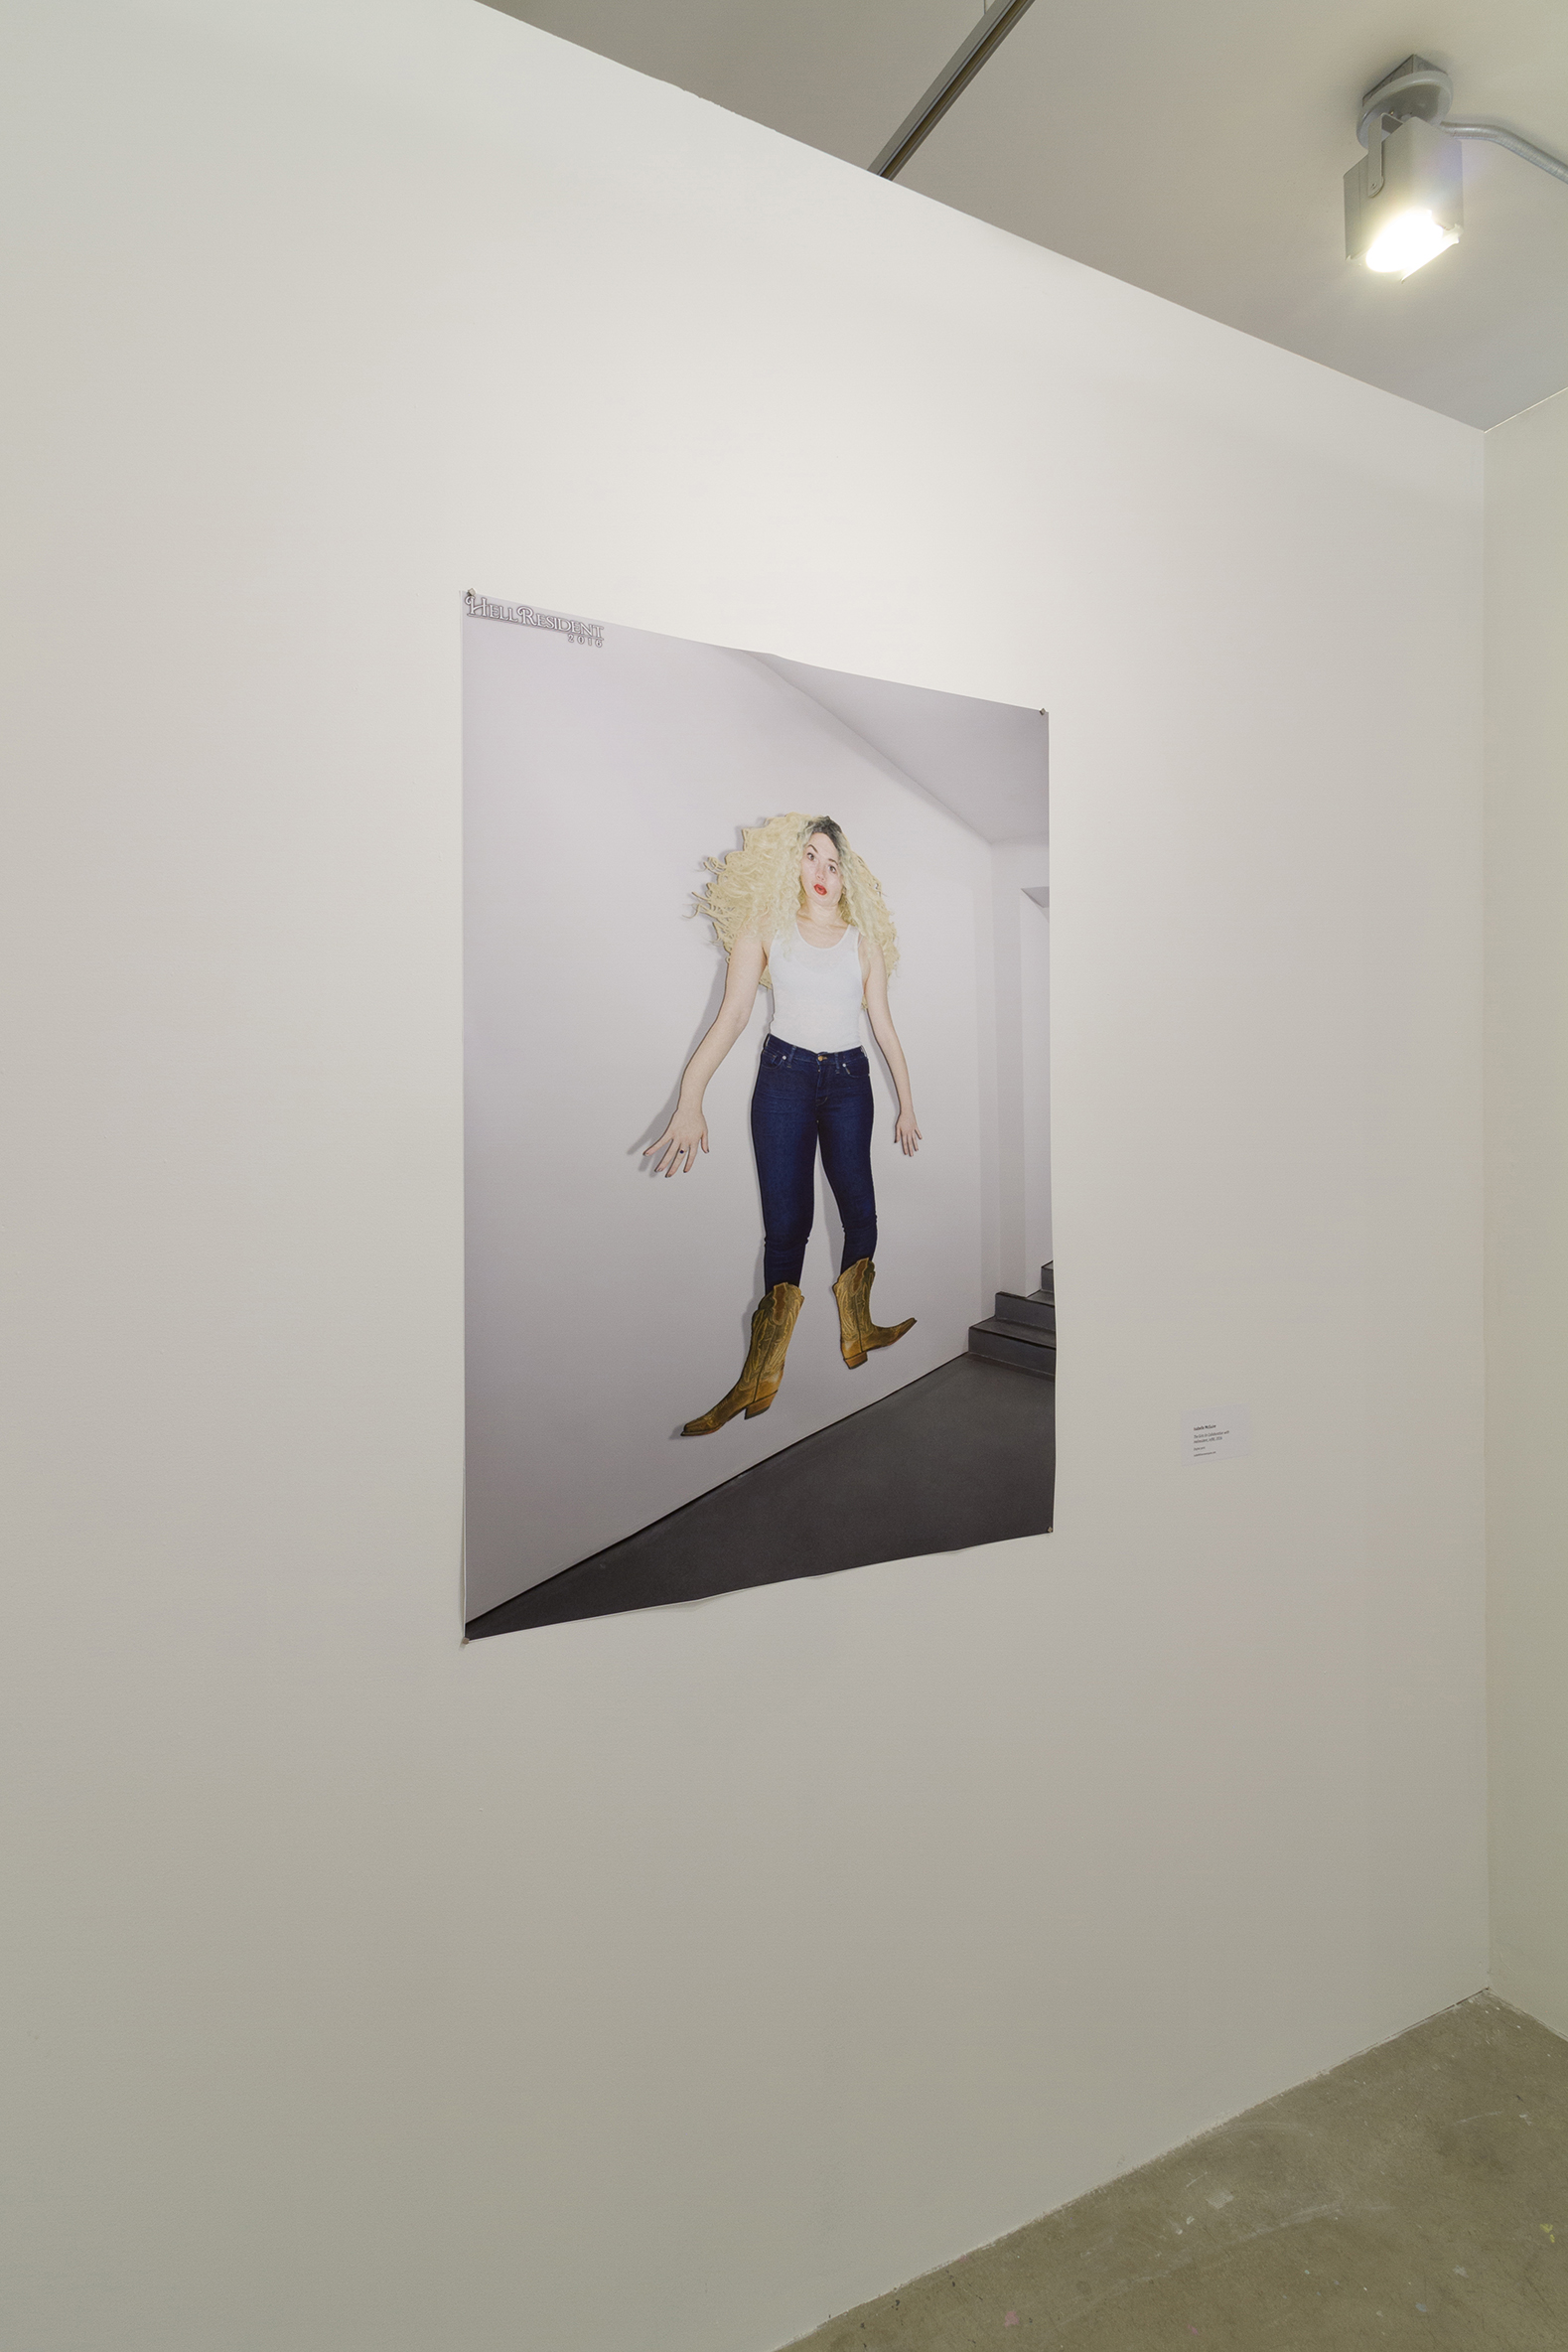 A print of a girl stylisticily flattened hung on a white wall